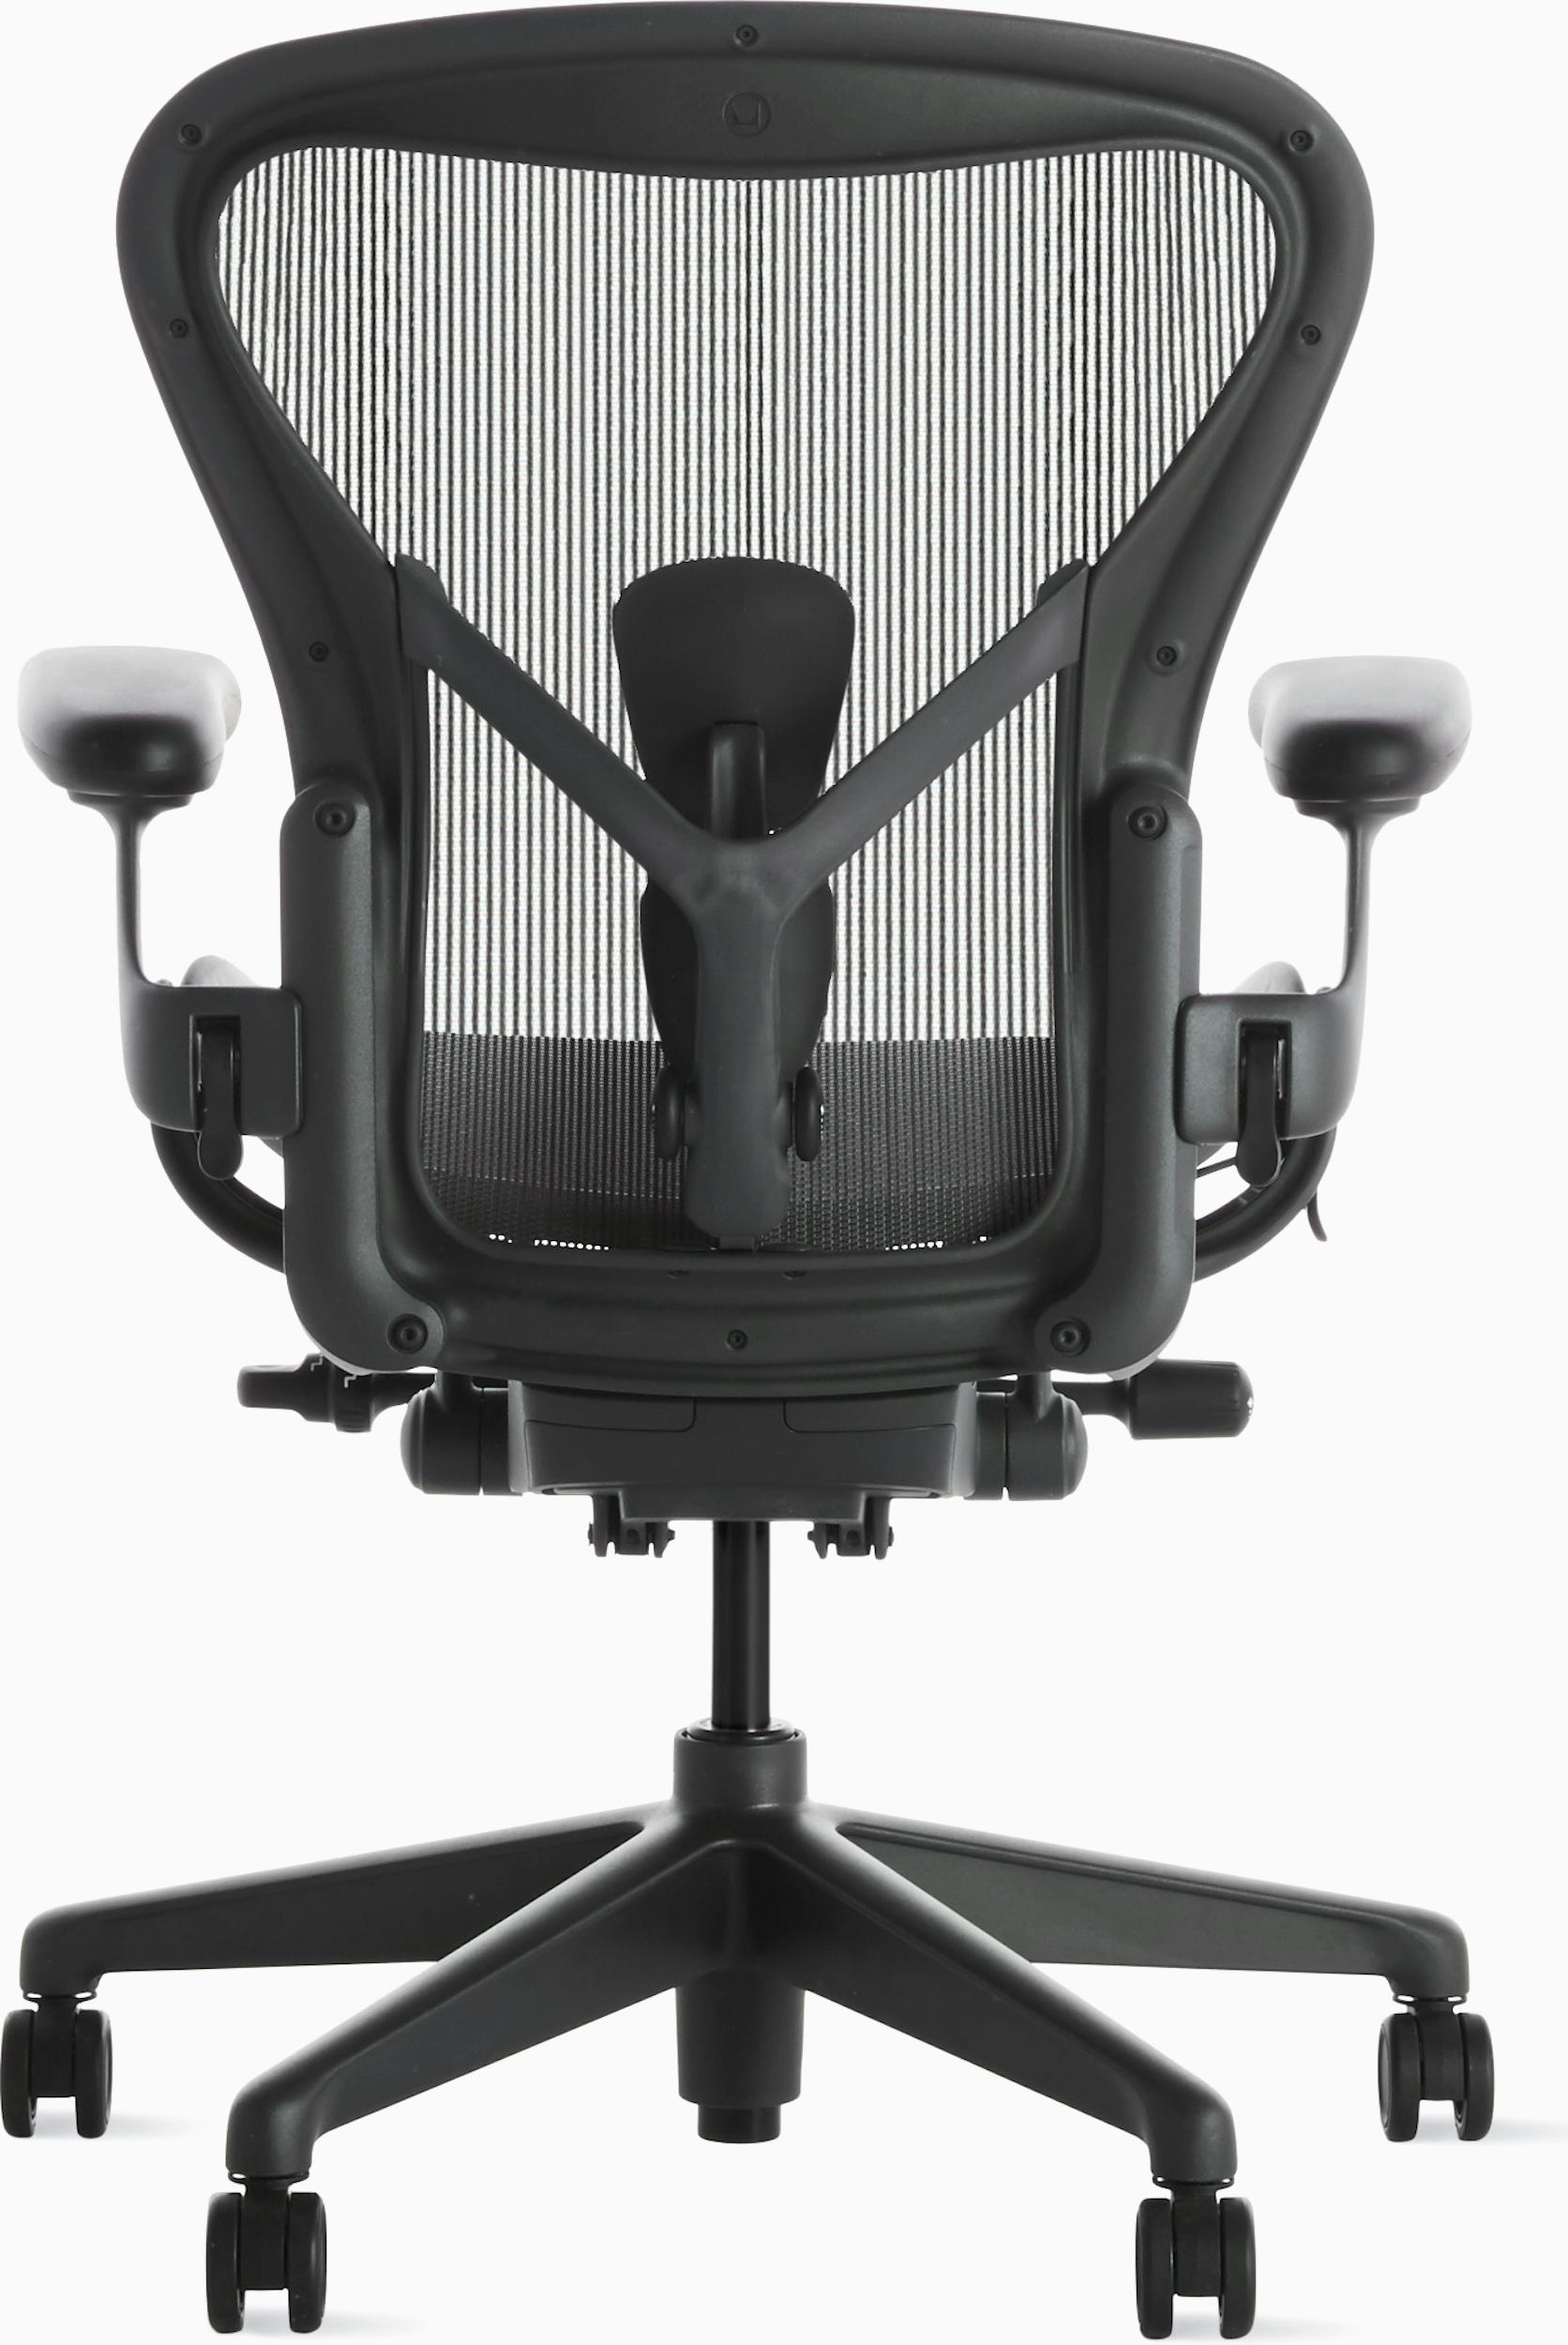 Excavated Tips for Buying the Best Seat Cushion for Office Chair